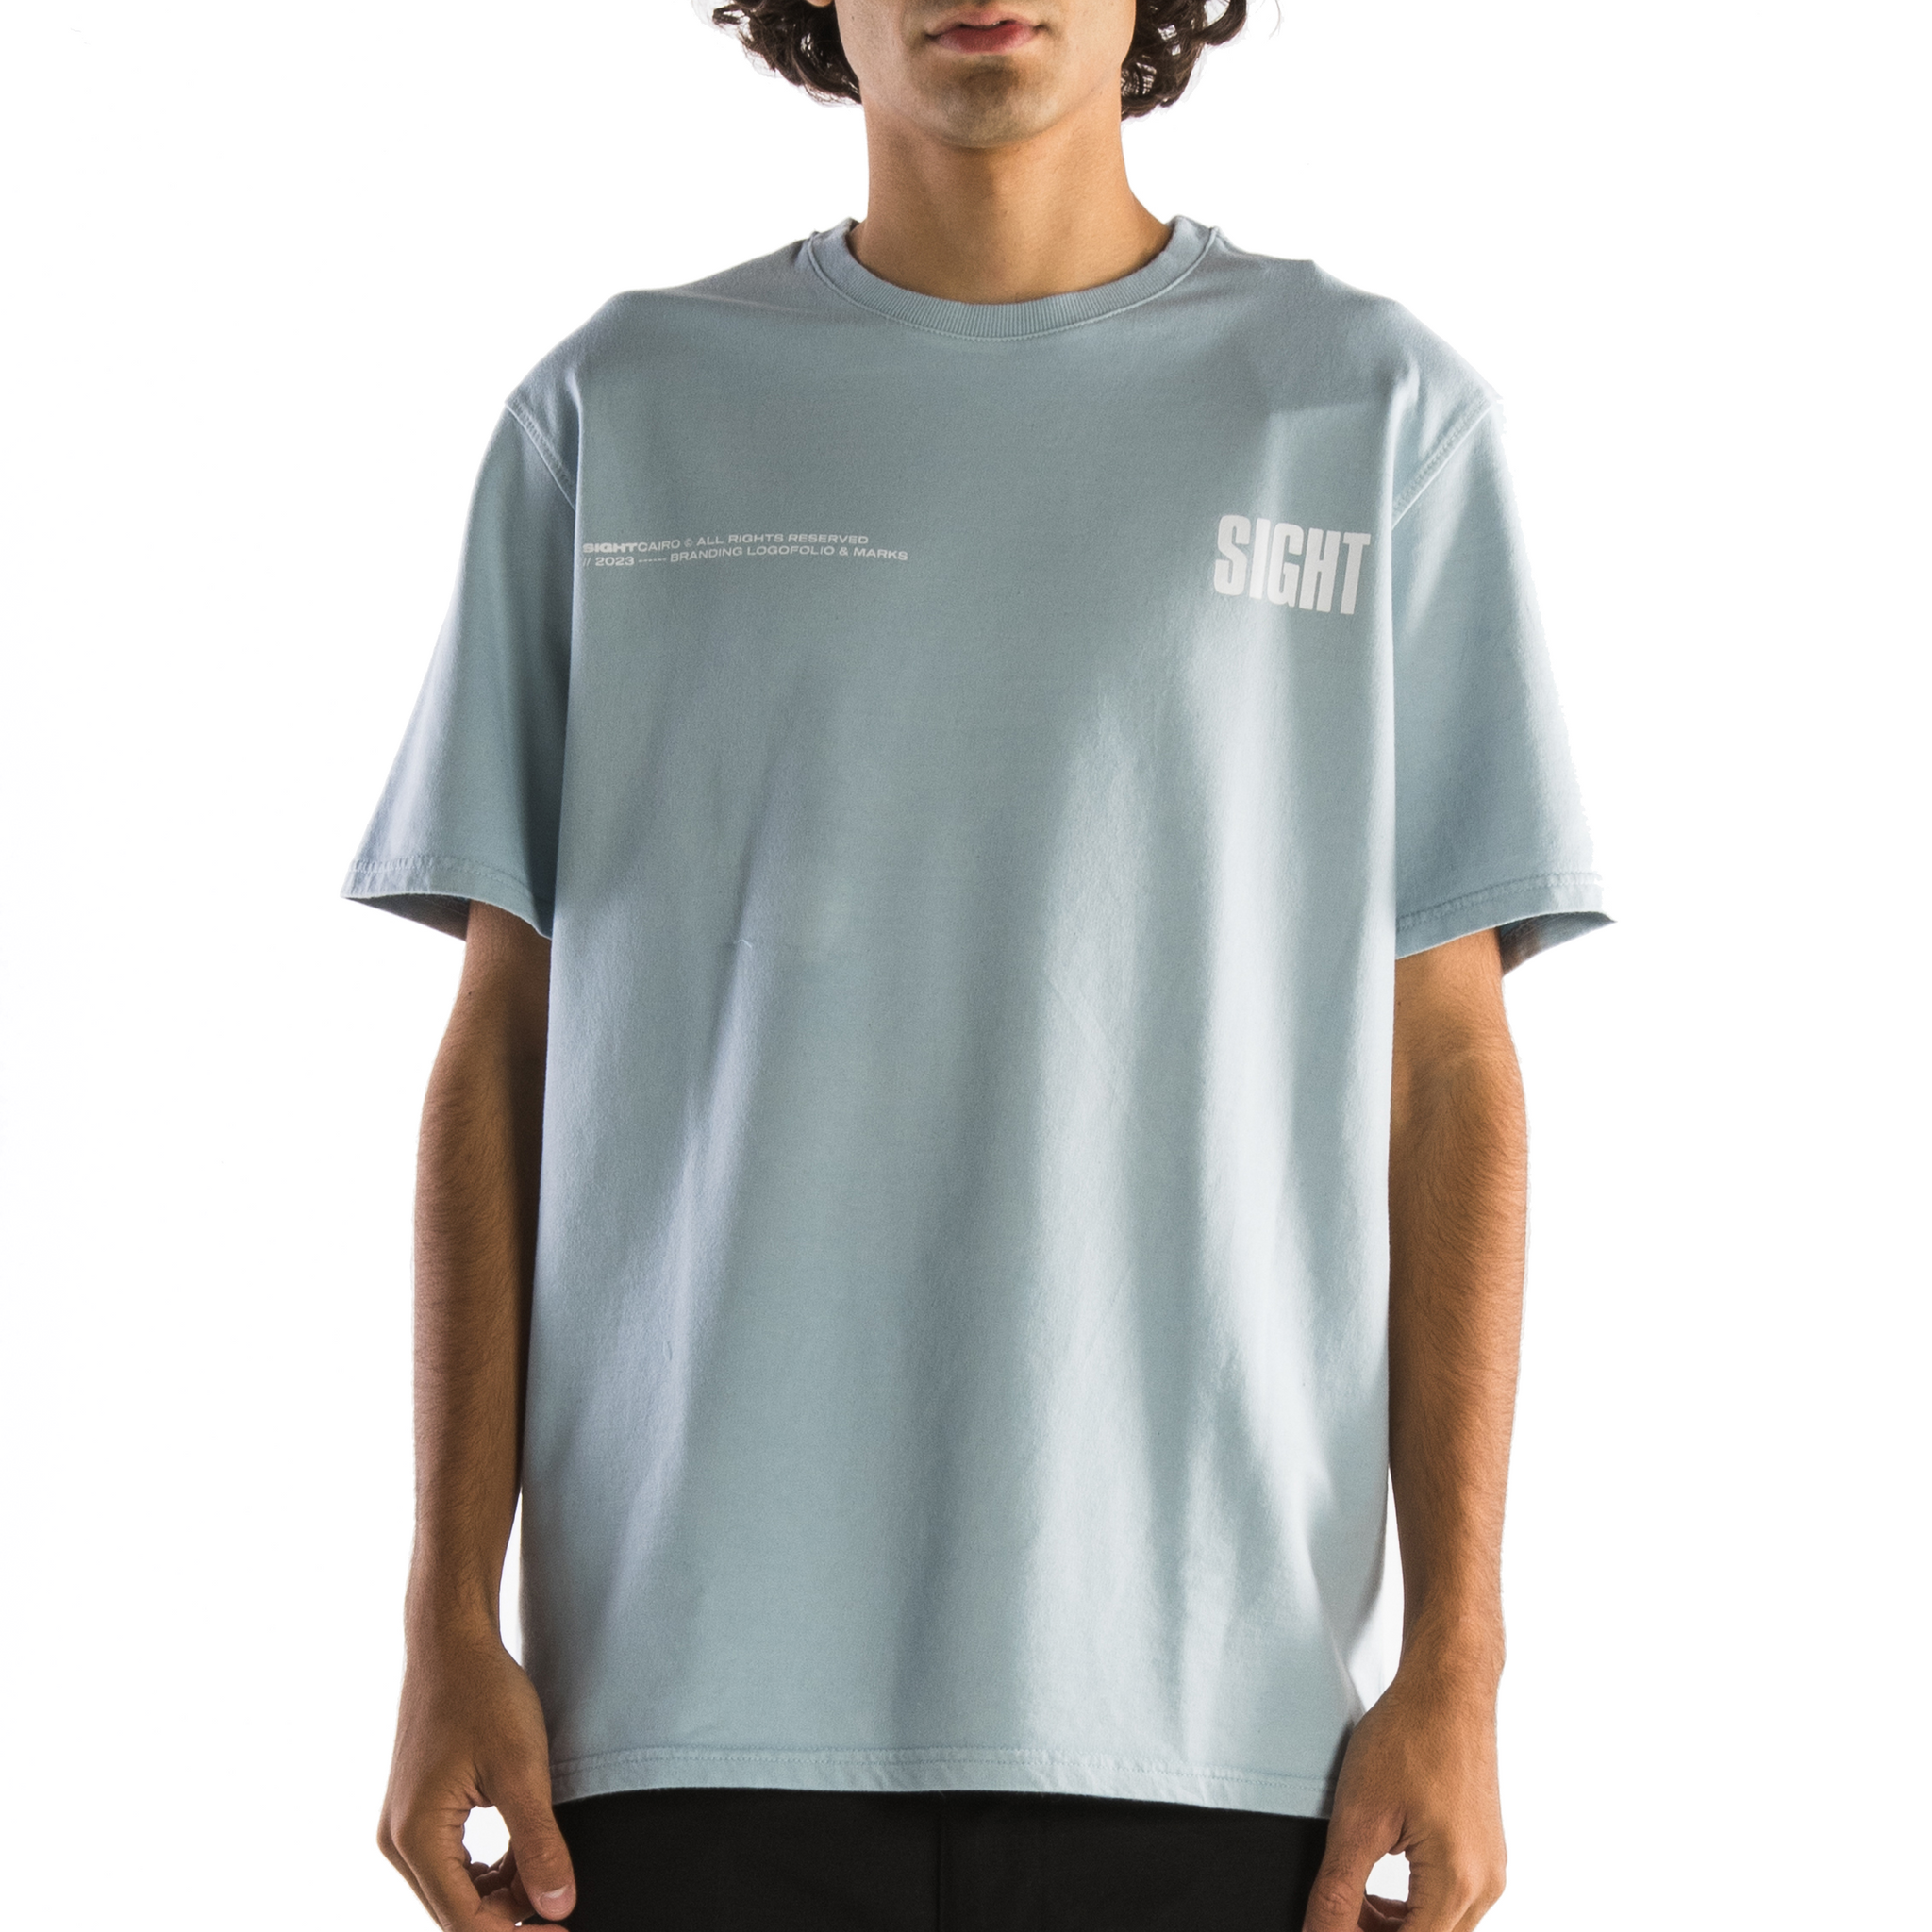 "Stamped" Baby Blue T-Shirt